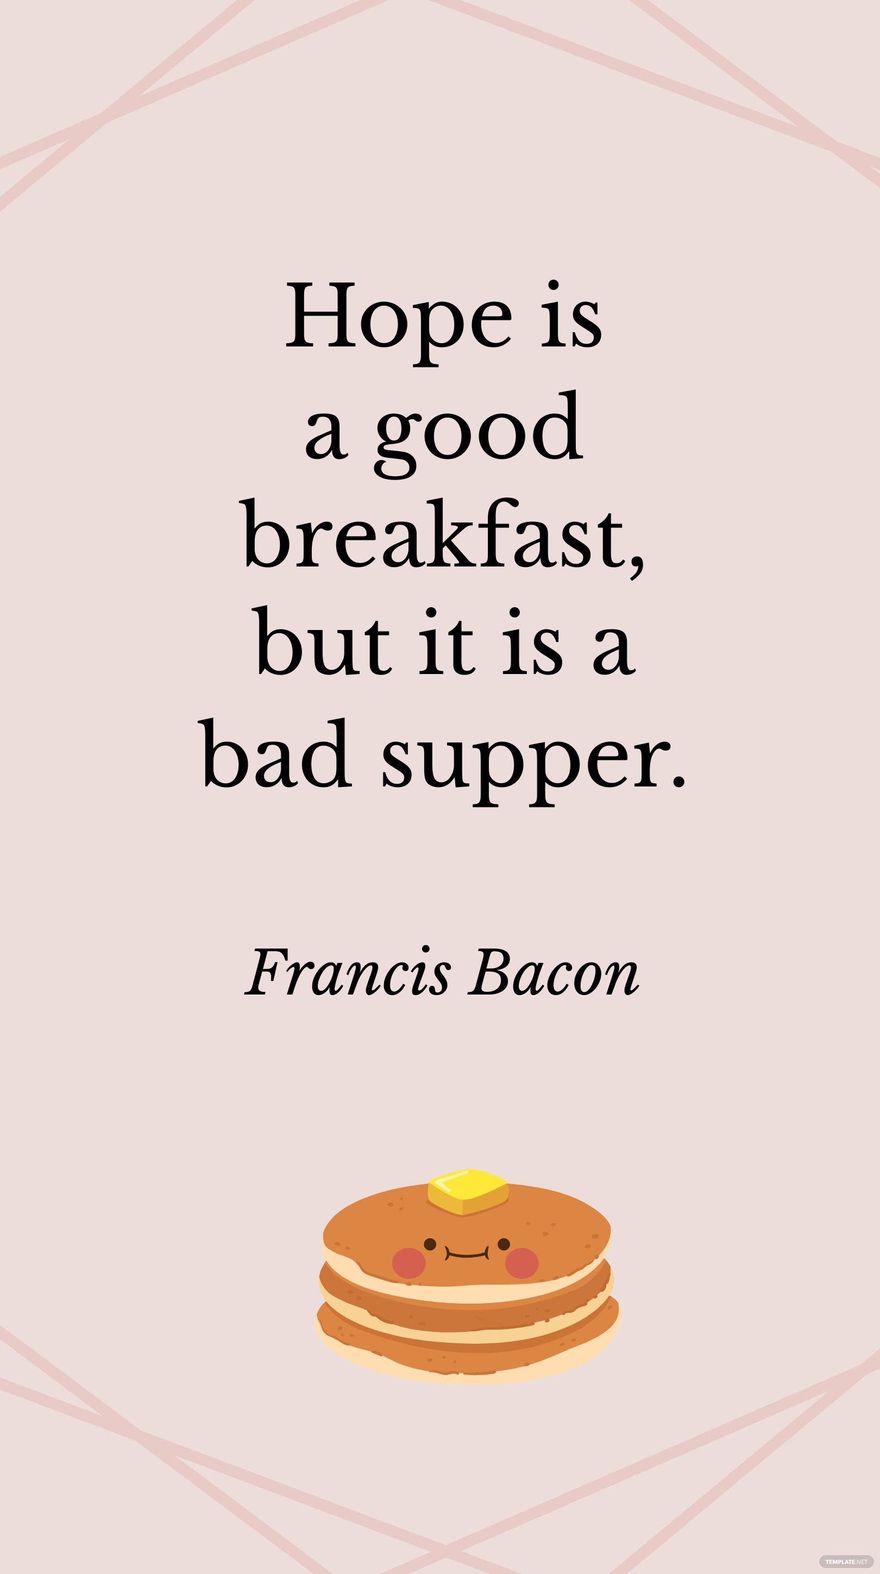 Free Francis Bacon - Hope is a good breakfast, but it is a bad supper. in JPG